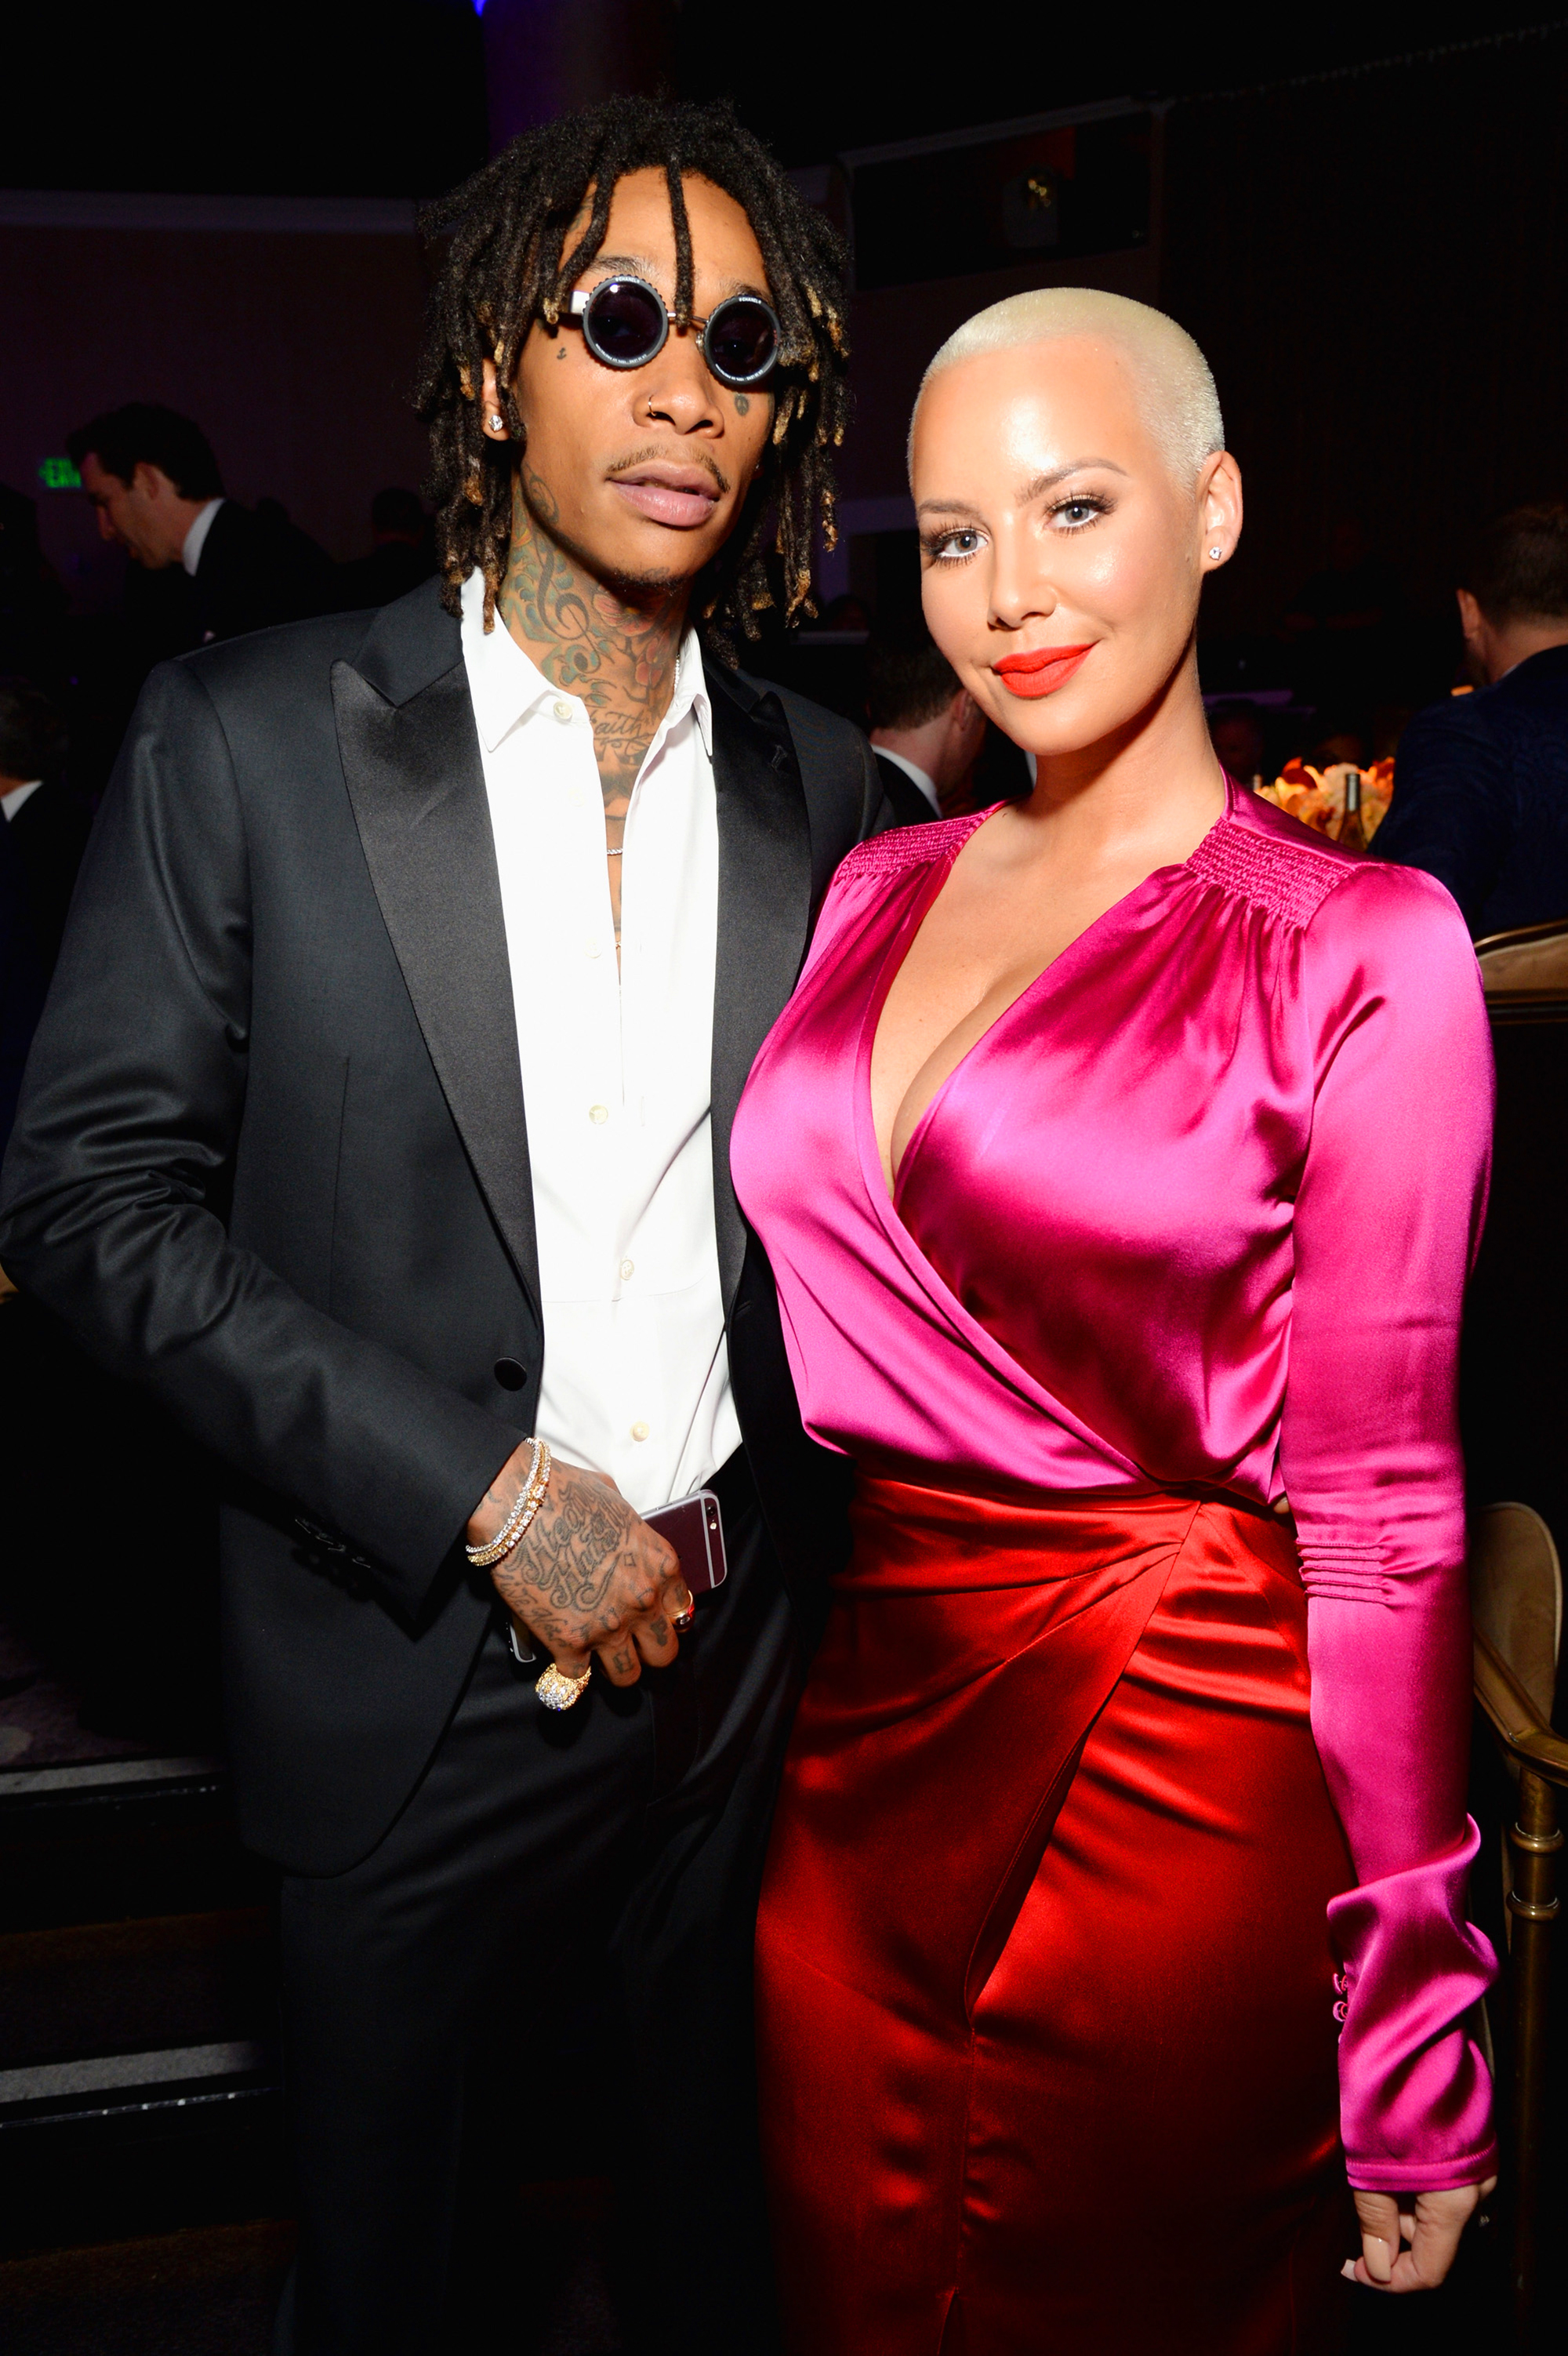 Amber Rose The Key to Coparenting With Wiz Khalifa Involves